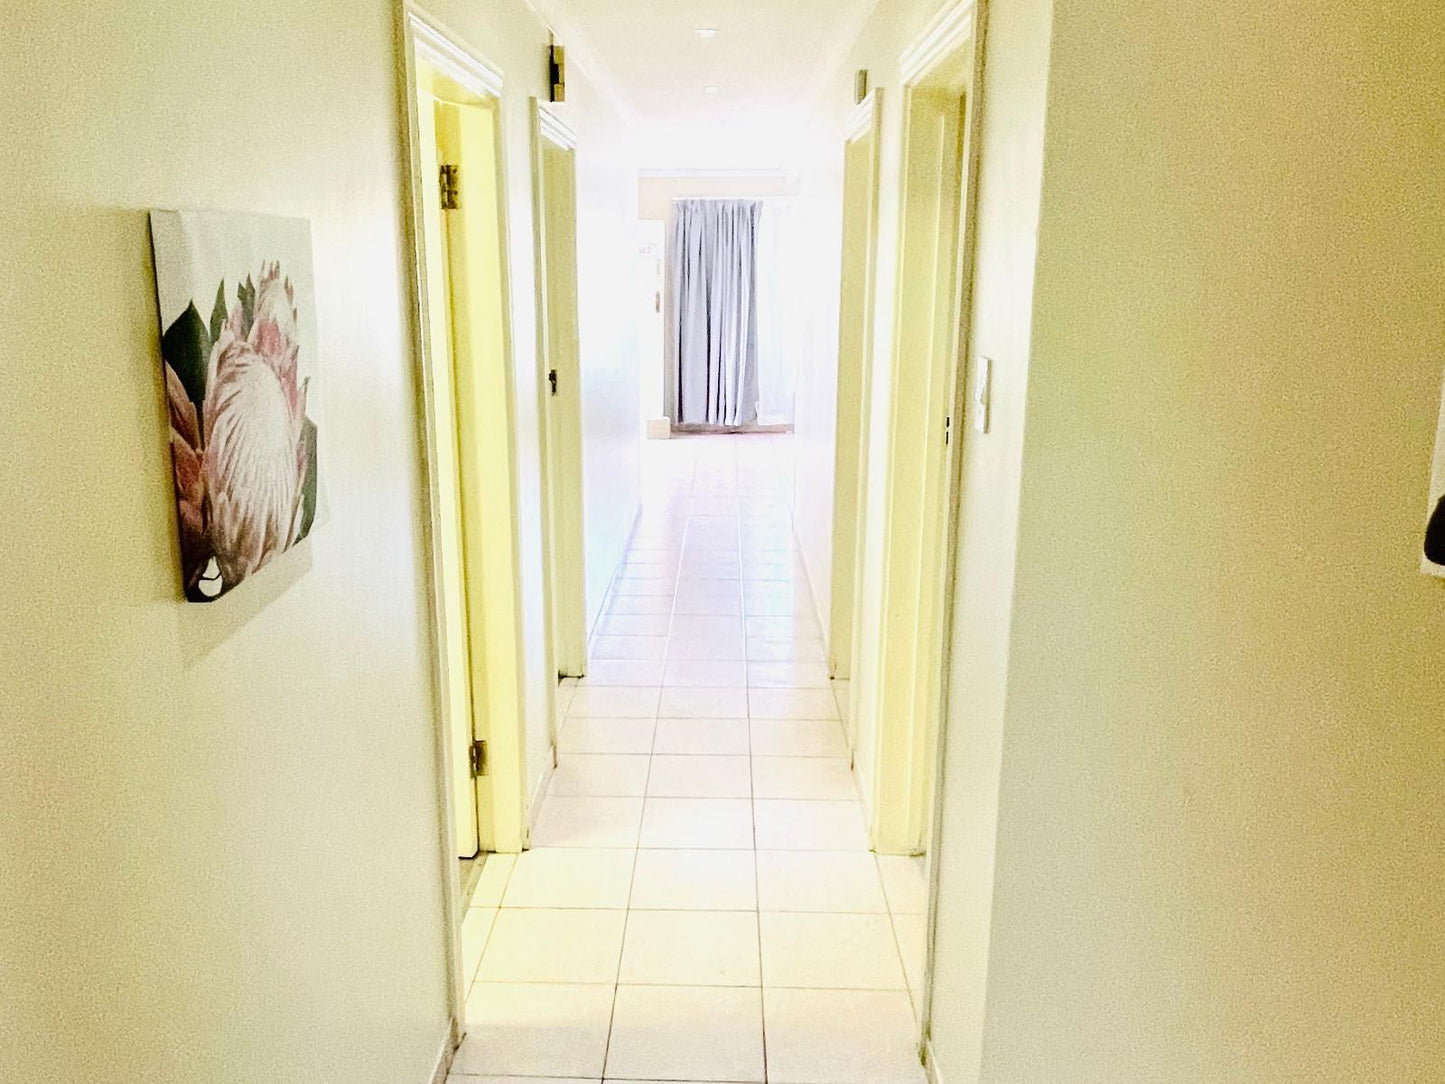 HOTEL VIBES CAPE TOWN UNIT 1 @ C And C Hotel Vibes Cpt Plattekloof